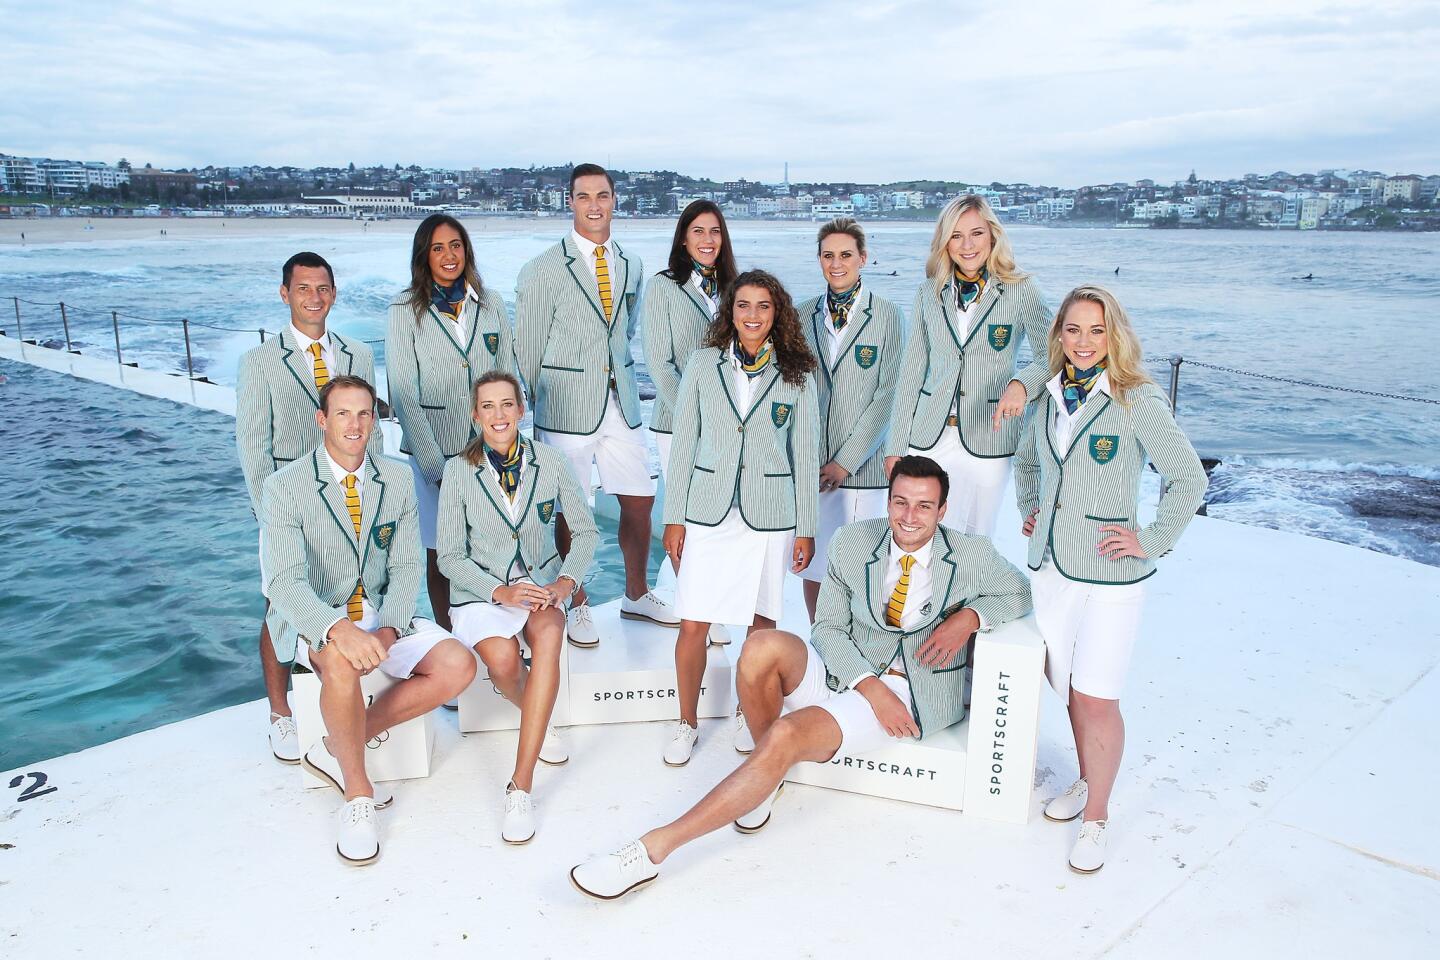 The look of Australia's Sportscraft-designed opening ceremony uniforms is inspired by the outfits worn by the Aussie team in the 1924 Paris Olympics.